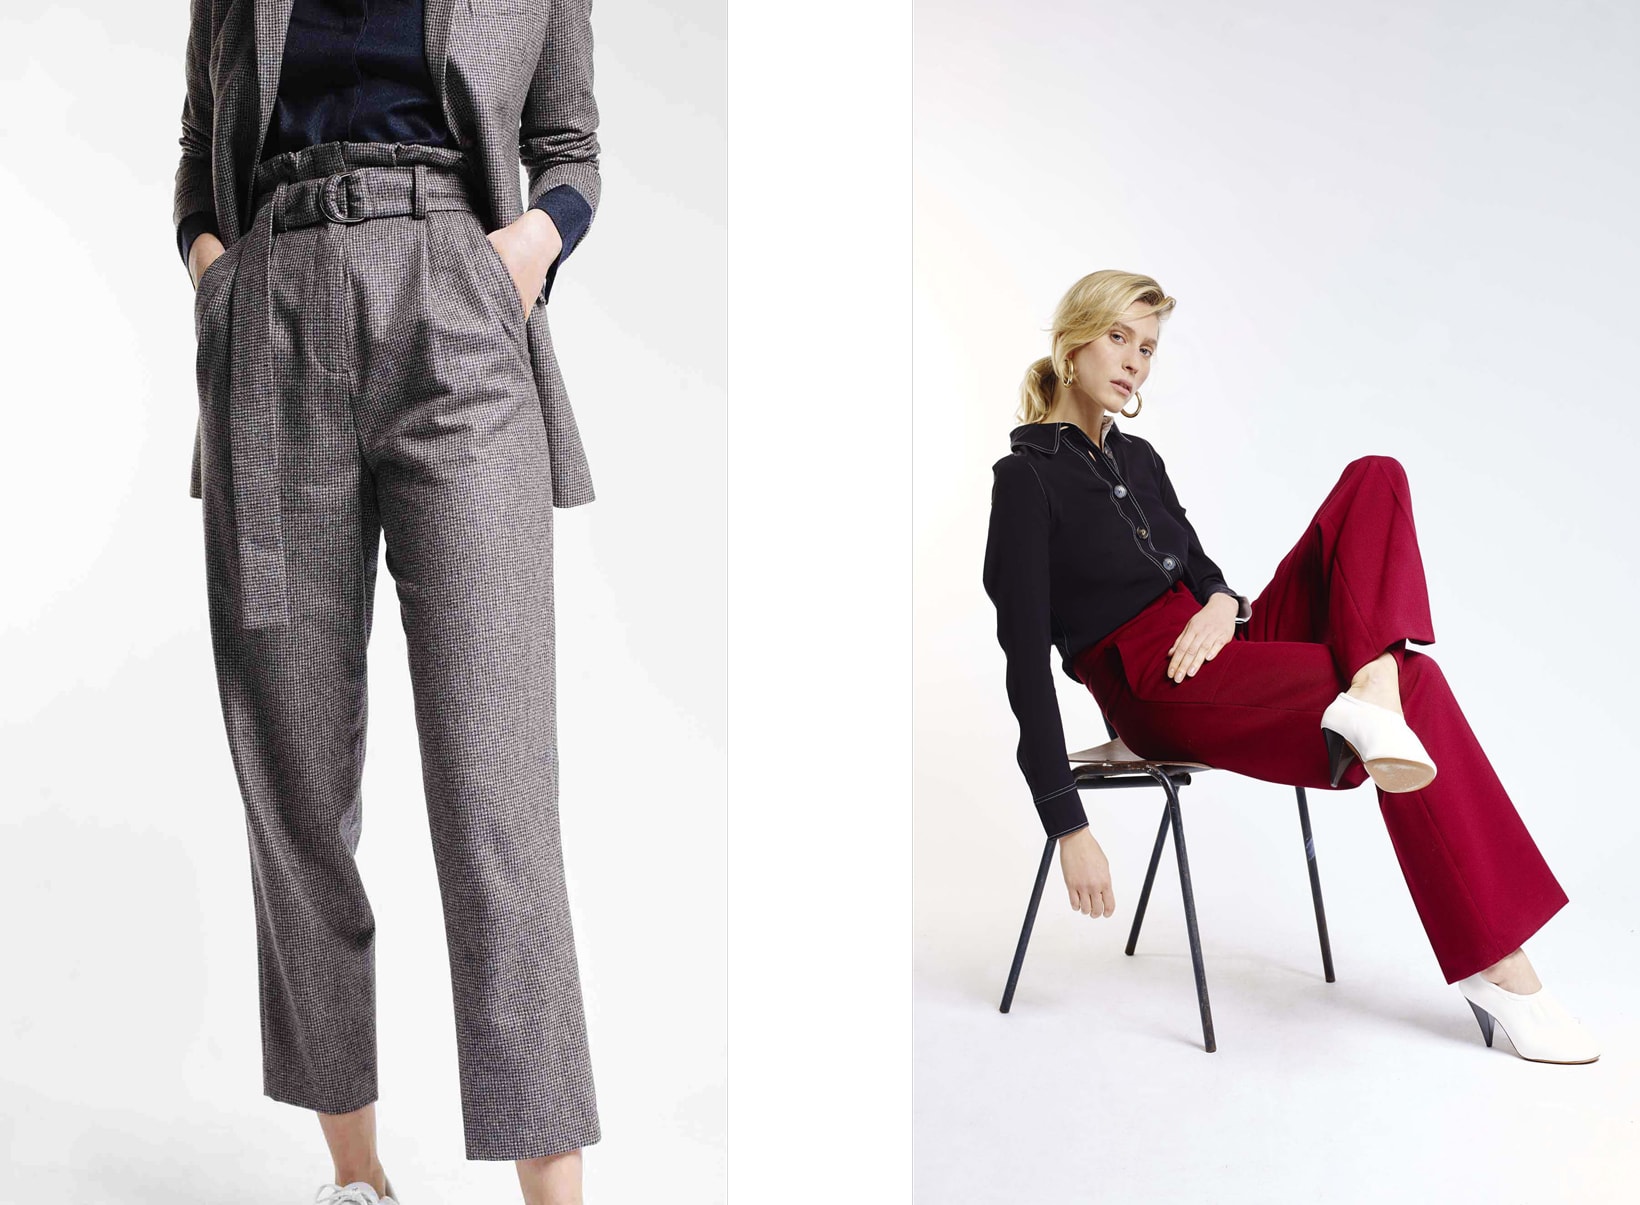 Harmony Paris A Daily Uniform Collection Lookbook Trousers Grey Red Shirt Black